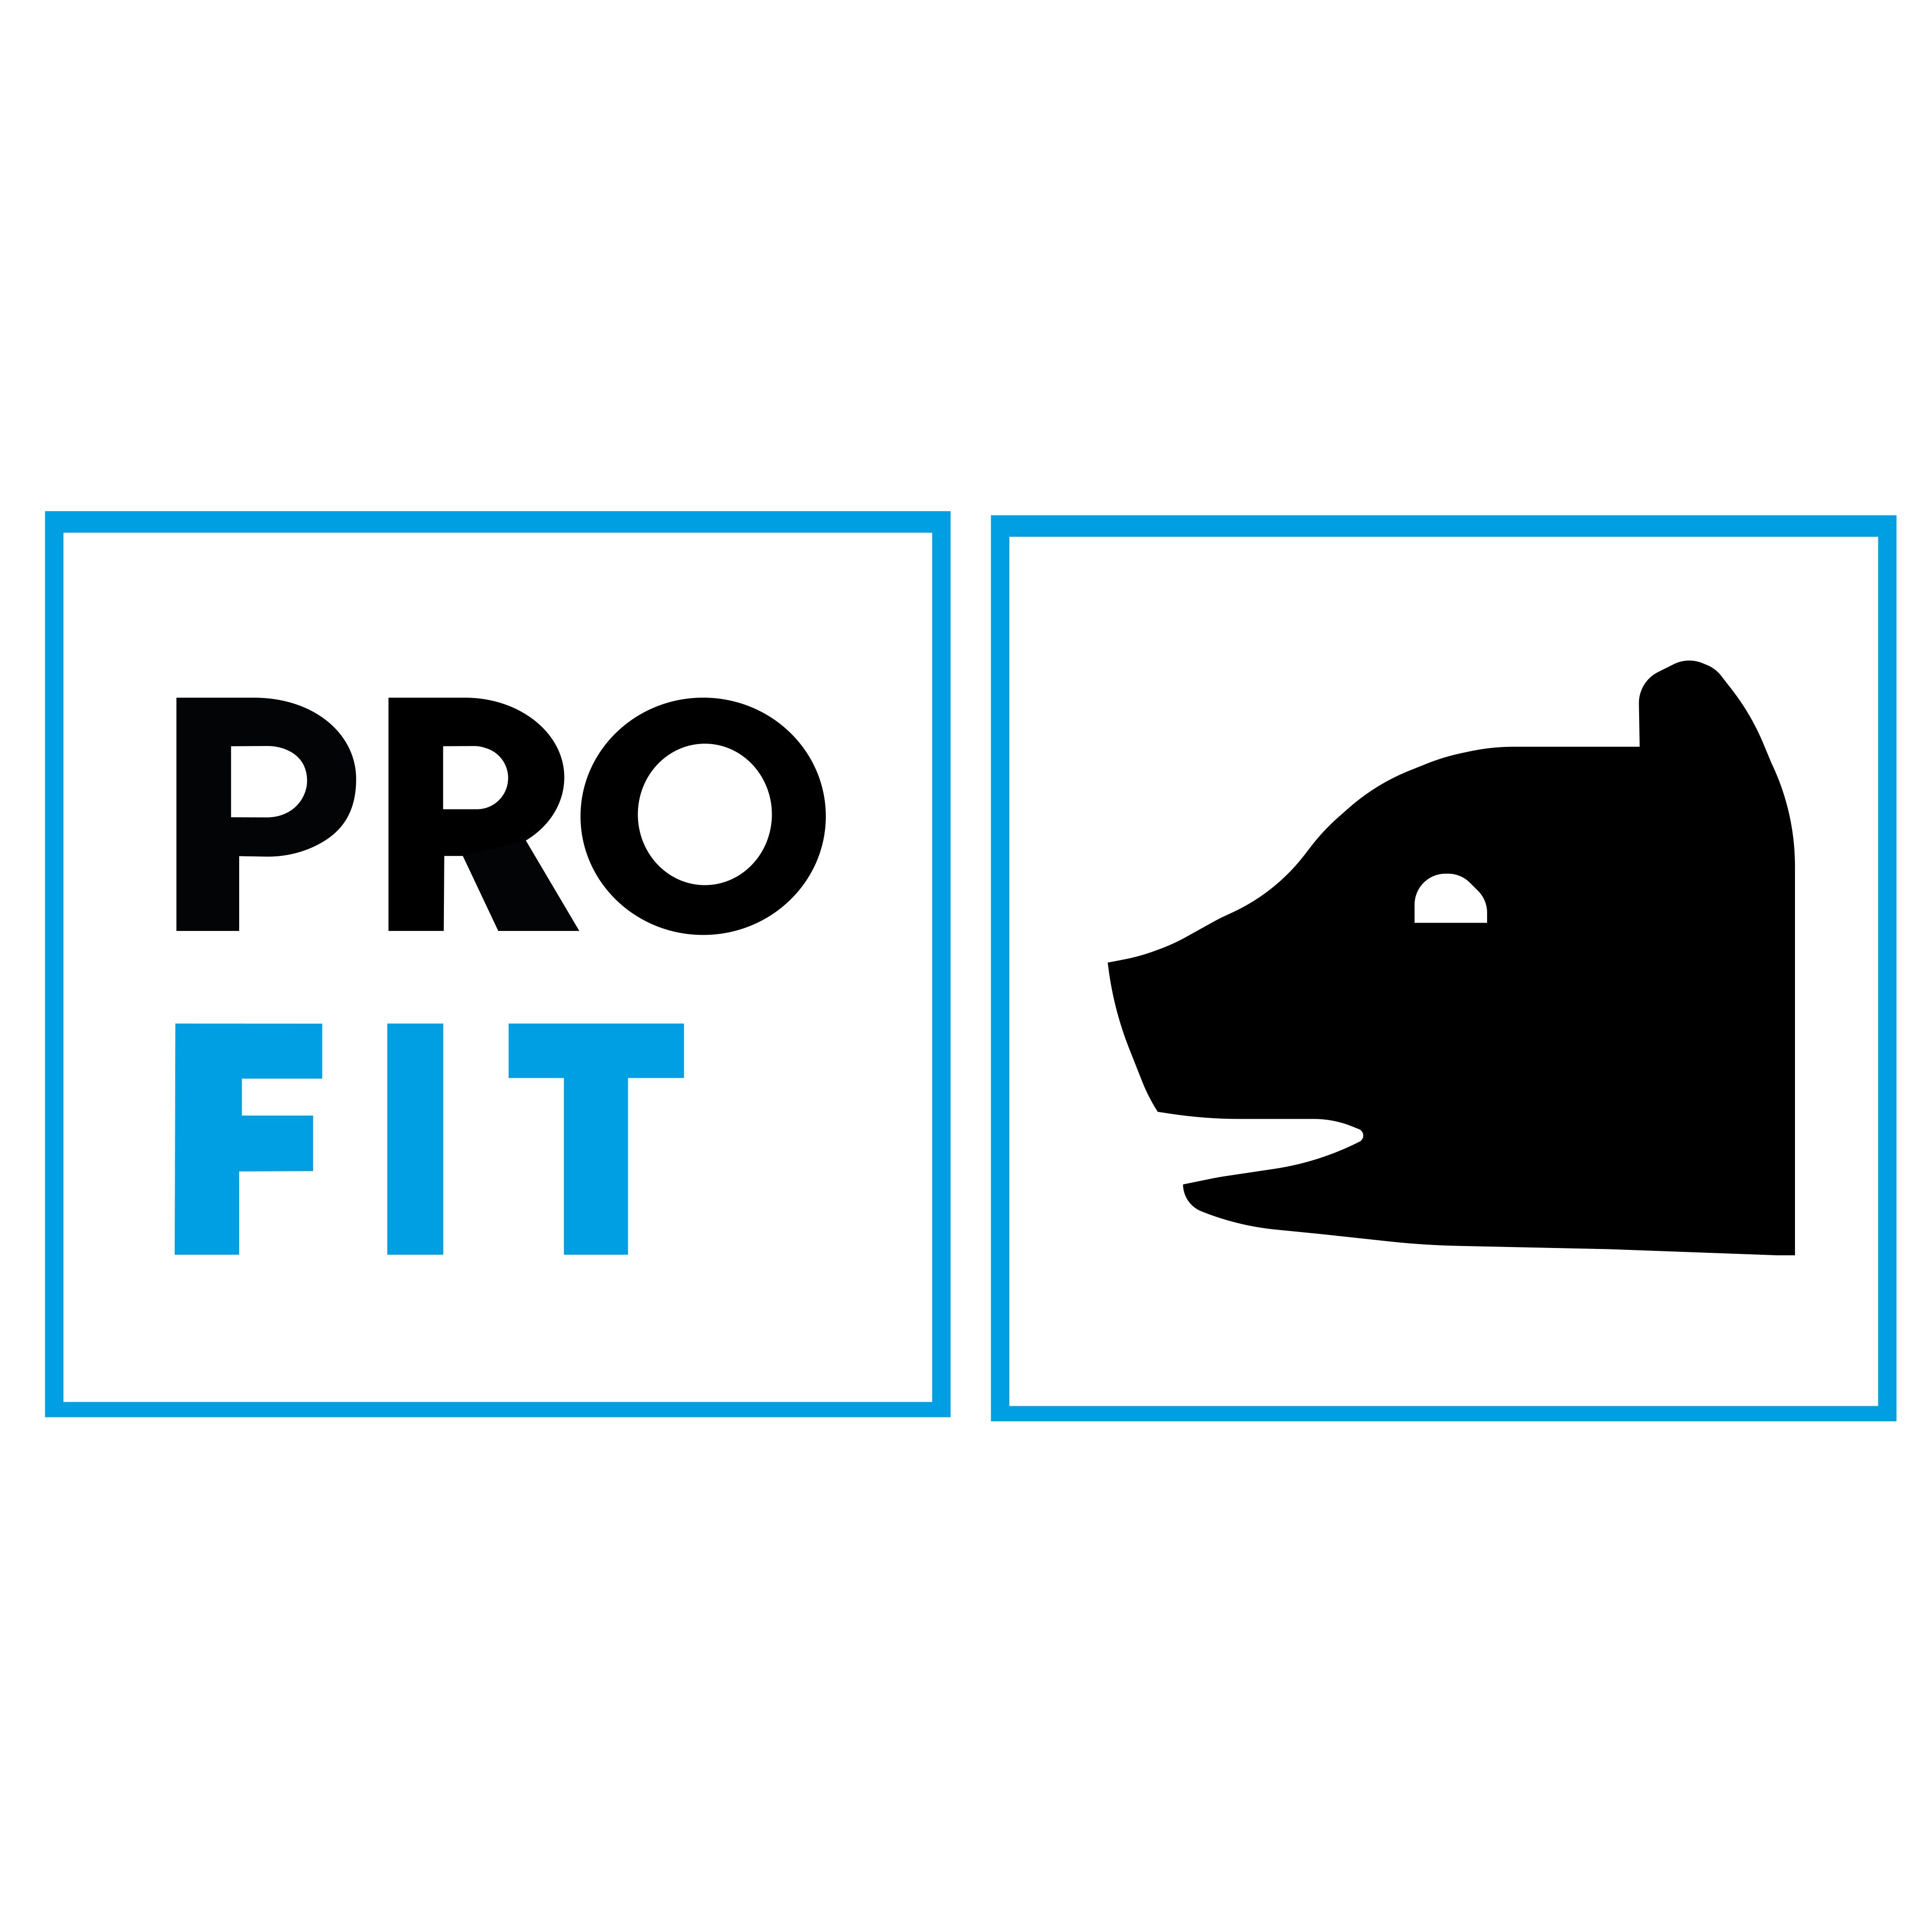 PRO FIT by Fitzner